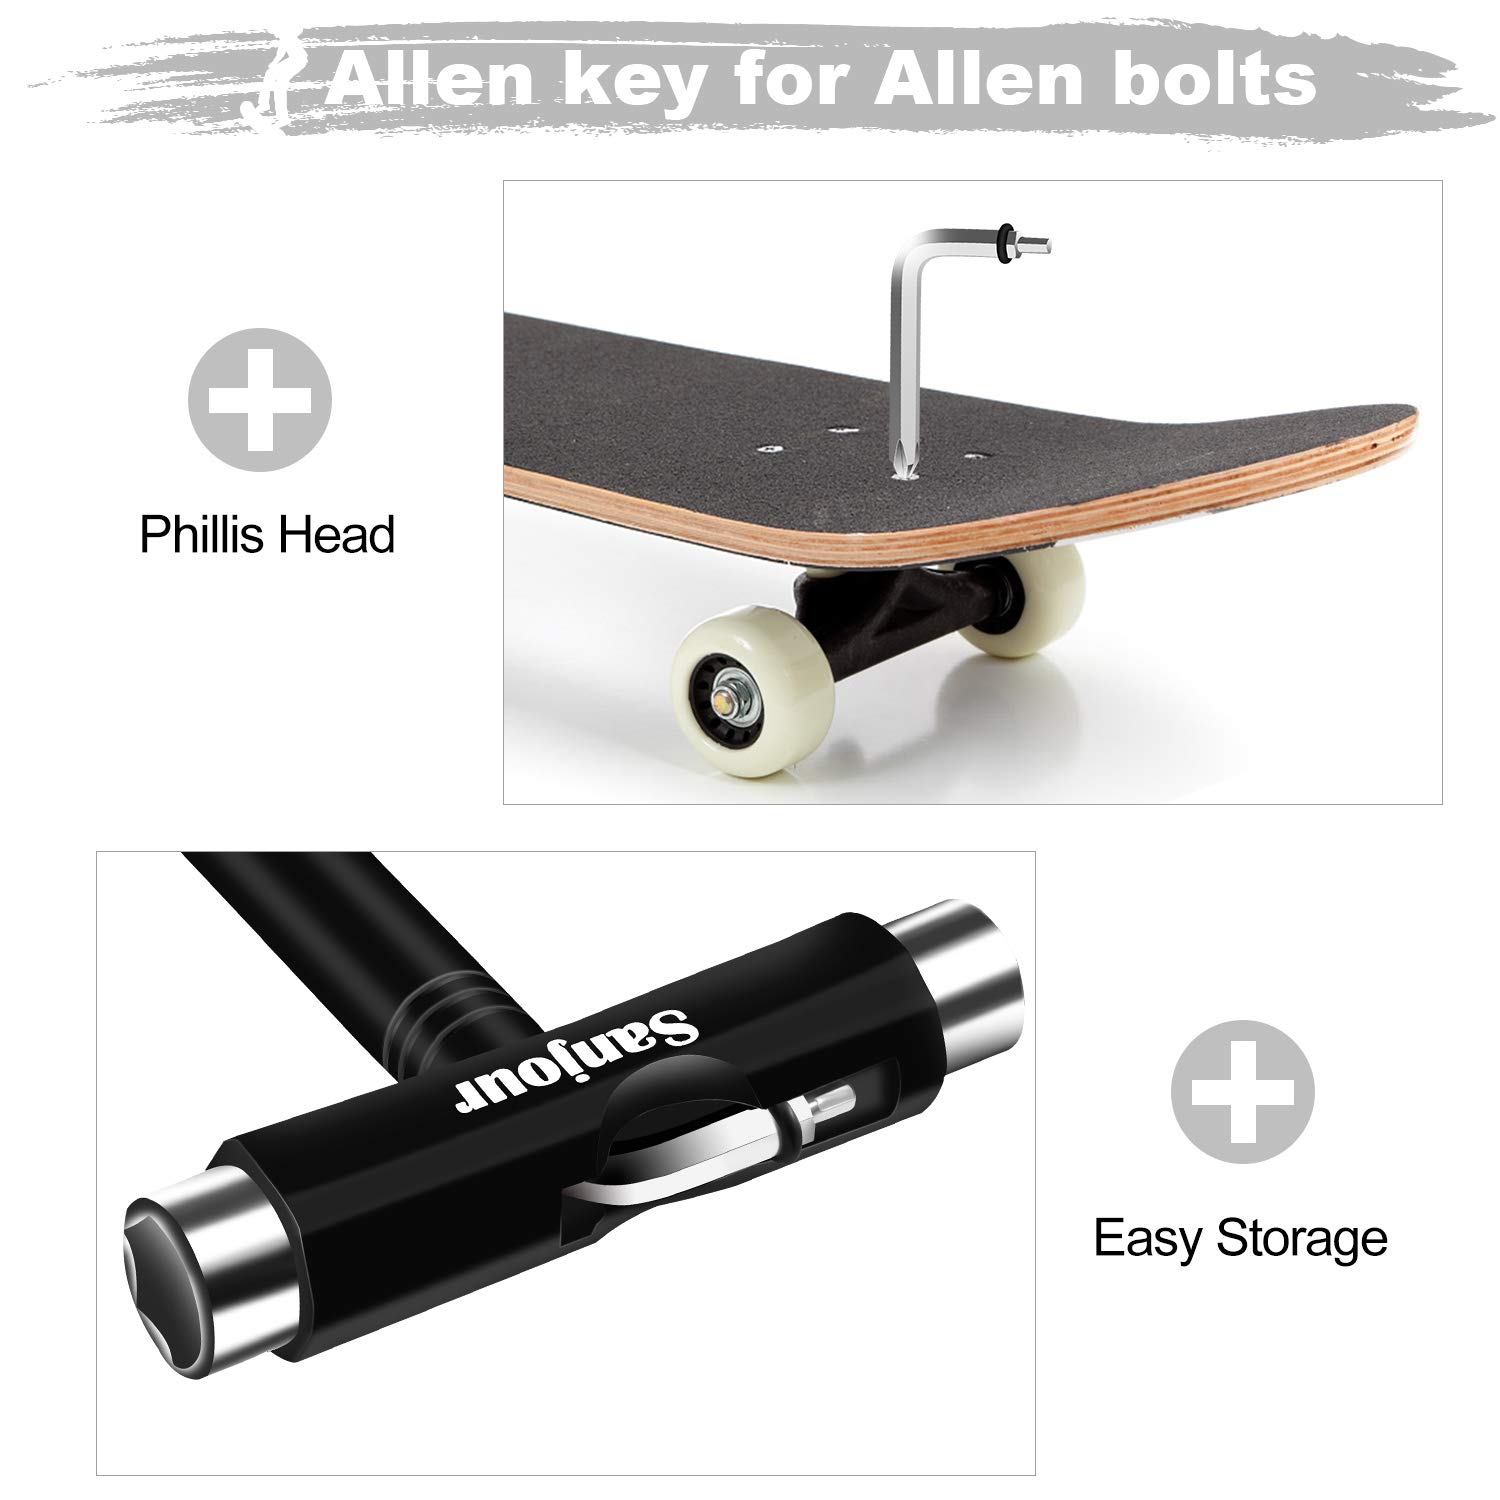 Sanjour All-in-One Skate Tools Multi-Function Portable Skateboard T Tool Kit Accessory with T-Type Allen Key and L-Type Phillips Head Screwdriver for Roller Skates/Skateboard-2 Packs (Cool Black)